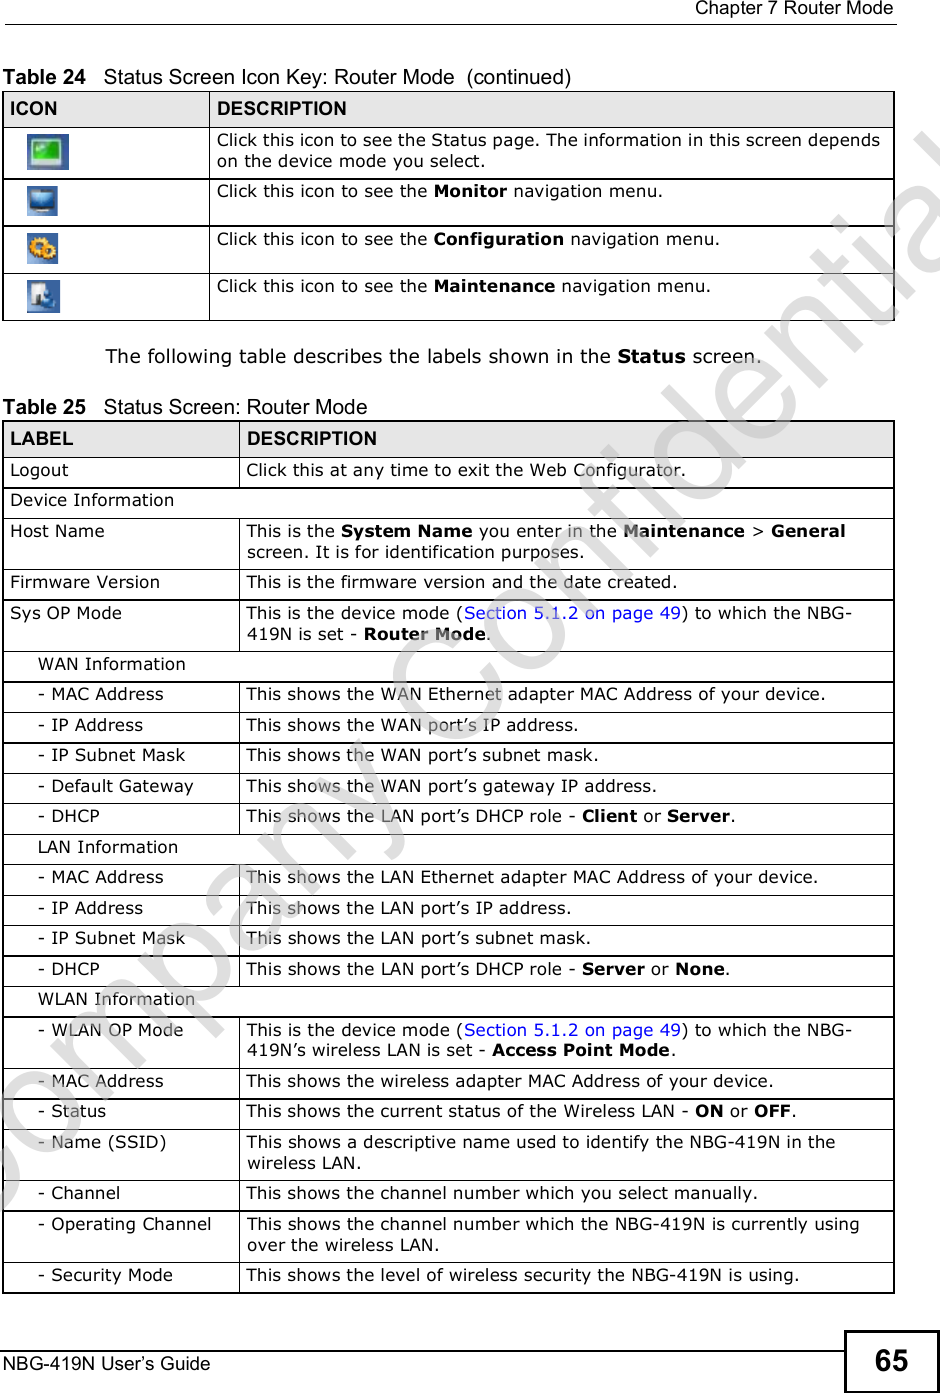  Chapter 7Router ModeNBG-419N User s Guide 65The following table describes the labels shown in the Status screen.Click this icon to see the Status page. The information in this screen depends on the device mode you select. Click this icon to see the Monitor navigation menu. Click this icon to see the Configuration navigation menu. Click this icon to see the Maintenance navigation menu. Table 24   Status Screen Icon Key: Router Mode  (continued)ICON DESCRIPTIONTable 25   Status Screen: Router Mode LABEL DESCRIPTIONLogoutClick this at any time to exit the Web Configurator.Device InformationHost NameThis is the System Name you enter in the Maintenance &gt; General screen. It is for identification purposes.Firmware VersionThis is the firmware version and the date created. Sys OP ModeThis is the device mode (Section 5.1.2 on page 49) to which the NBG-419N is set - Router Mode.WAN Information- MAC AddressThis shows the WAN Ethernet adapter MAC Address of your device.- IP AddressThis shows the WAN port!s IP address.- IP Subnet MaskThis shows the WAN port!s subnet mask.- Default GatewayThis shows the WAN port!s gateway IP address.- DHCPThis shows the LAN port!s DHCP role - Client or Server.LAN Information- MAC AddressThis shows the LAN Ethernet adapter MAC Address of your device.- IP AddressThis shows the LAN port!s IP address.- IP Subnet MaskThis shows the LAN port!s subnet mask.- DHCPThis shows the LAN port!s DHCP role - Server or None.WLAN Information- WLAN OP ModeThis is the device mode (Section 5.1.2 on page 49) to which the NBG-419N!s wireless LAN is set - Access Point Mode.- MAC AddressThis shows the wireless adapter MAC Address of your device.- StatusThis shows the current status of the Wireless LAN - ON or OFF.- Name (SSID)This shows a descriptive name used to identify the NBG-419N in the wireless LAN. - ChannelThis shows the channel number which you select manually.- Operating ChannelThis shows the channel number which the NBG-419N is currently using over the wireless LAN. - Security ModeThis shows the level of wireless security the NBG-419N is using.Company Confidential